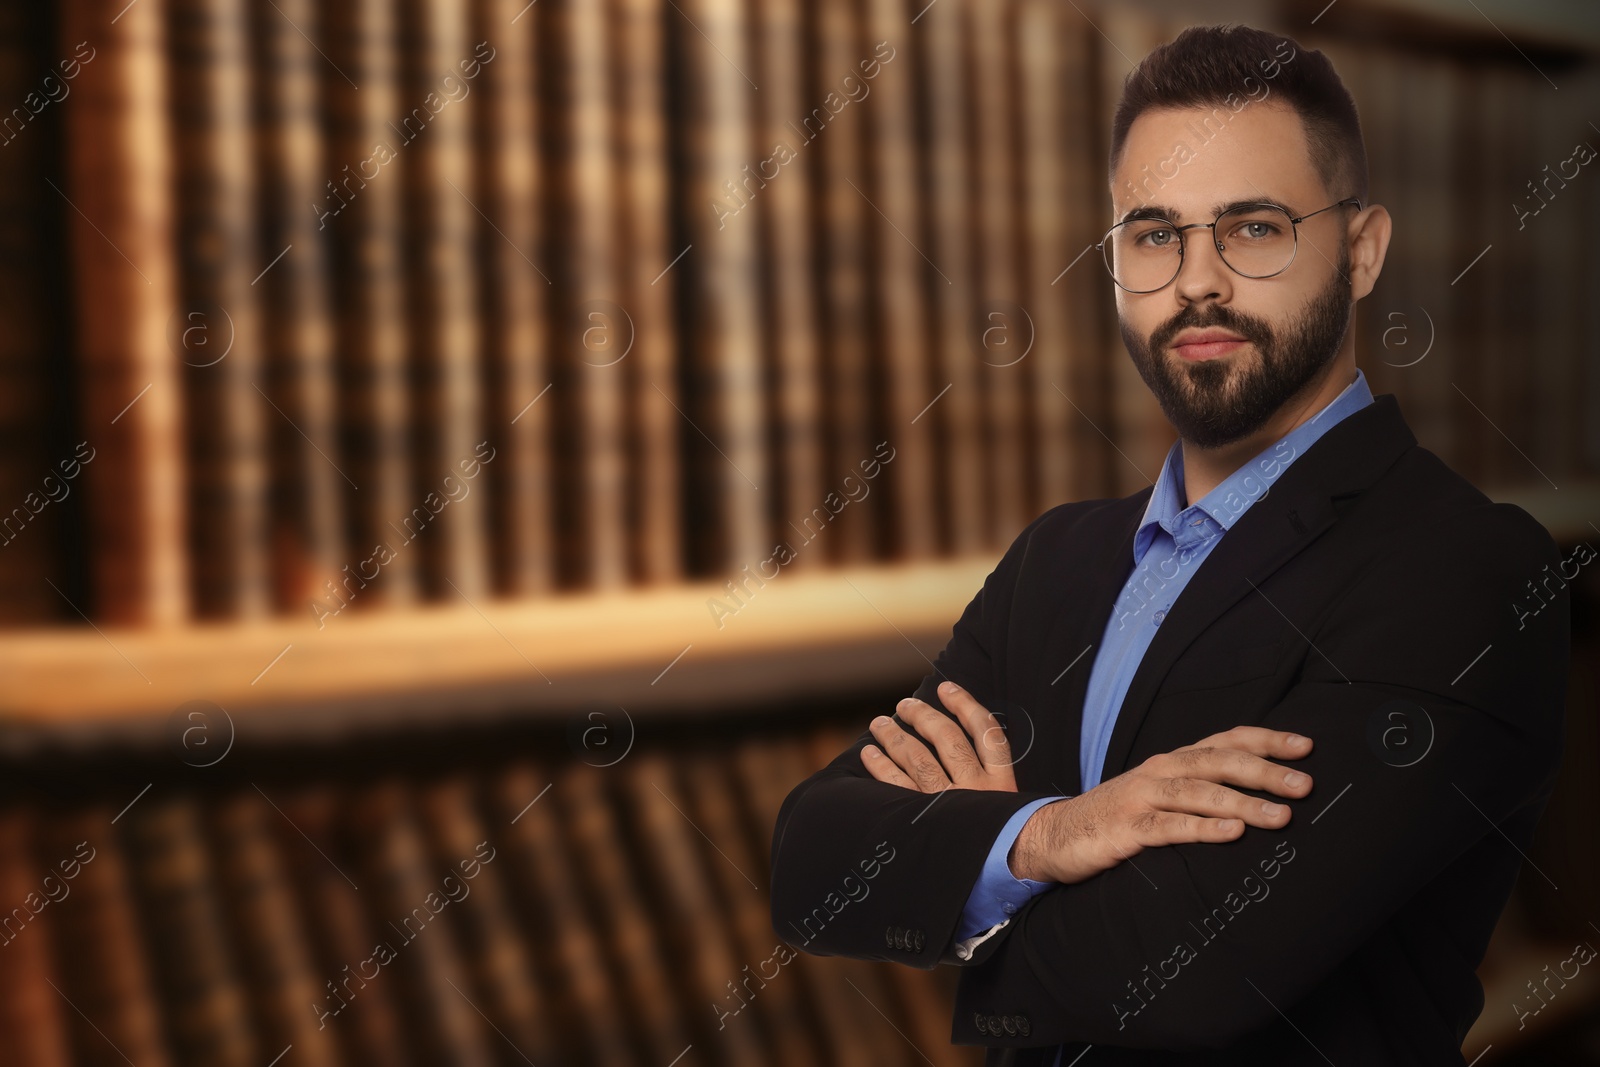 Image of Successful lawyer in glasses near shelves with books, space for text